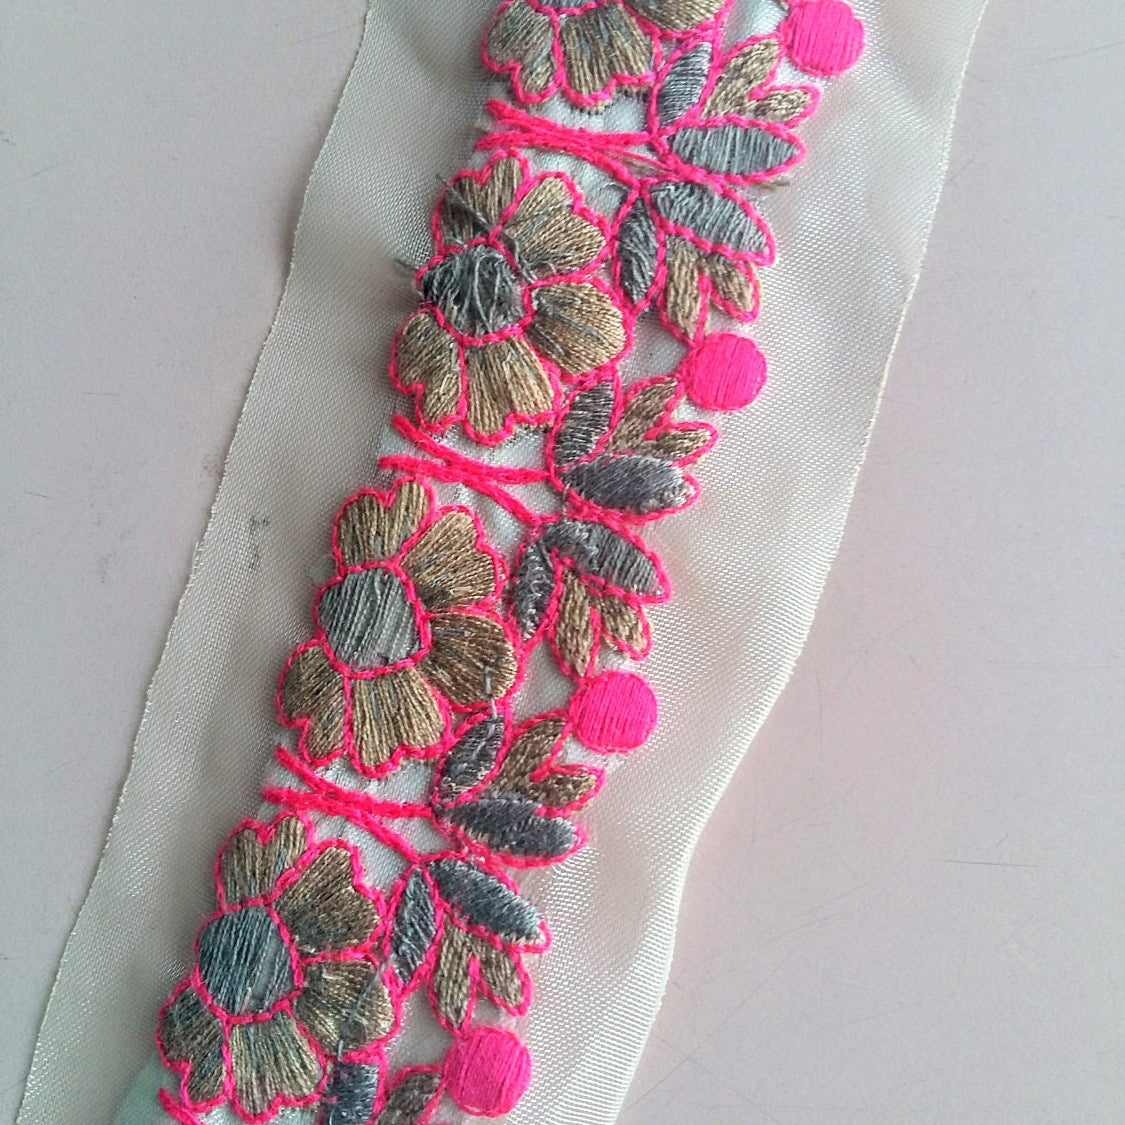 Sheer Gold Fabric Trim With Pink and Green Floral Thread Embroidery One Yard Lace Trim 58mm Wide - 200317L286